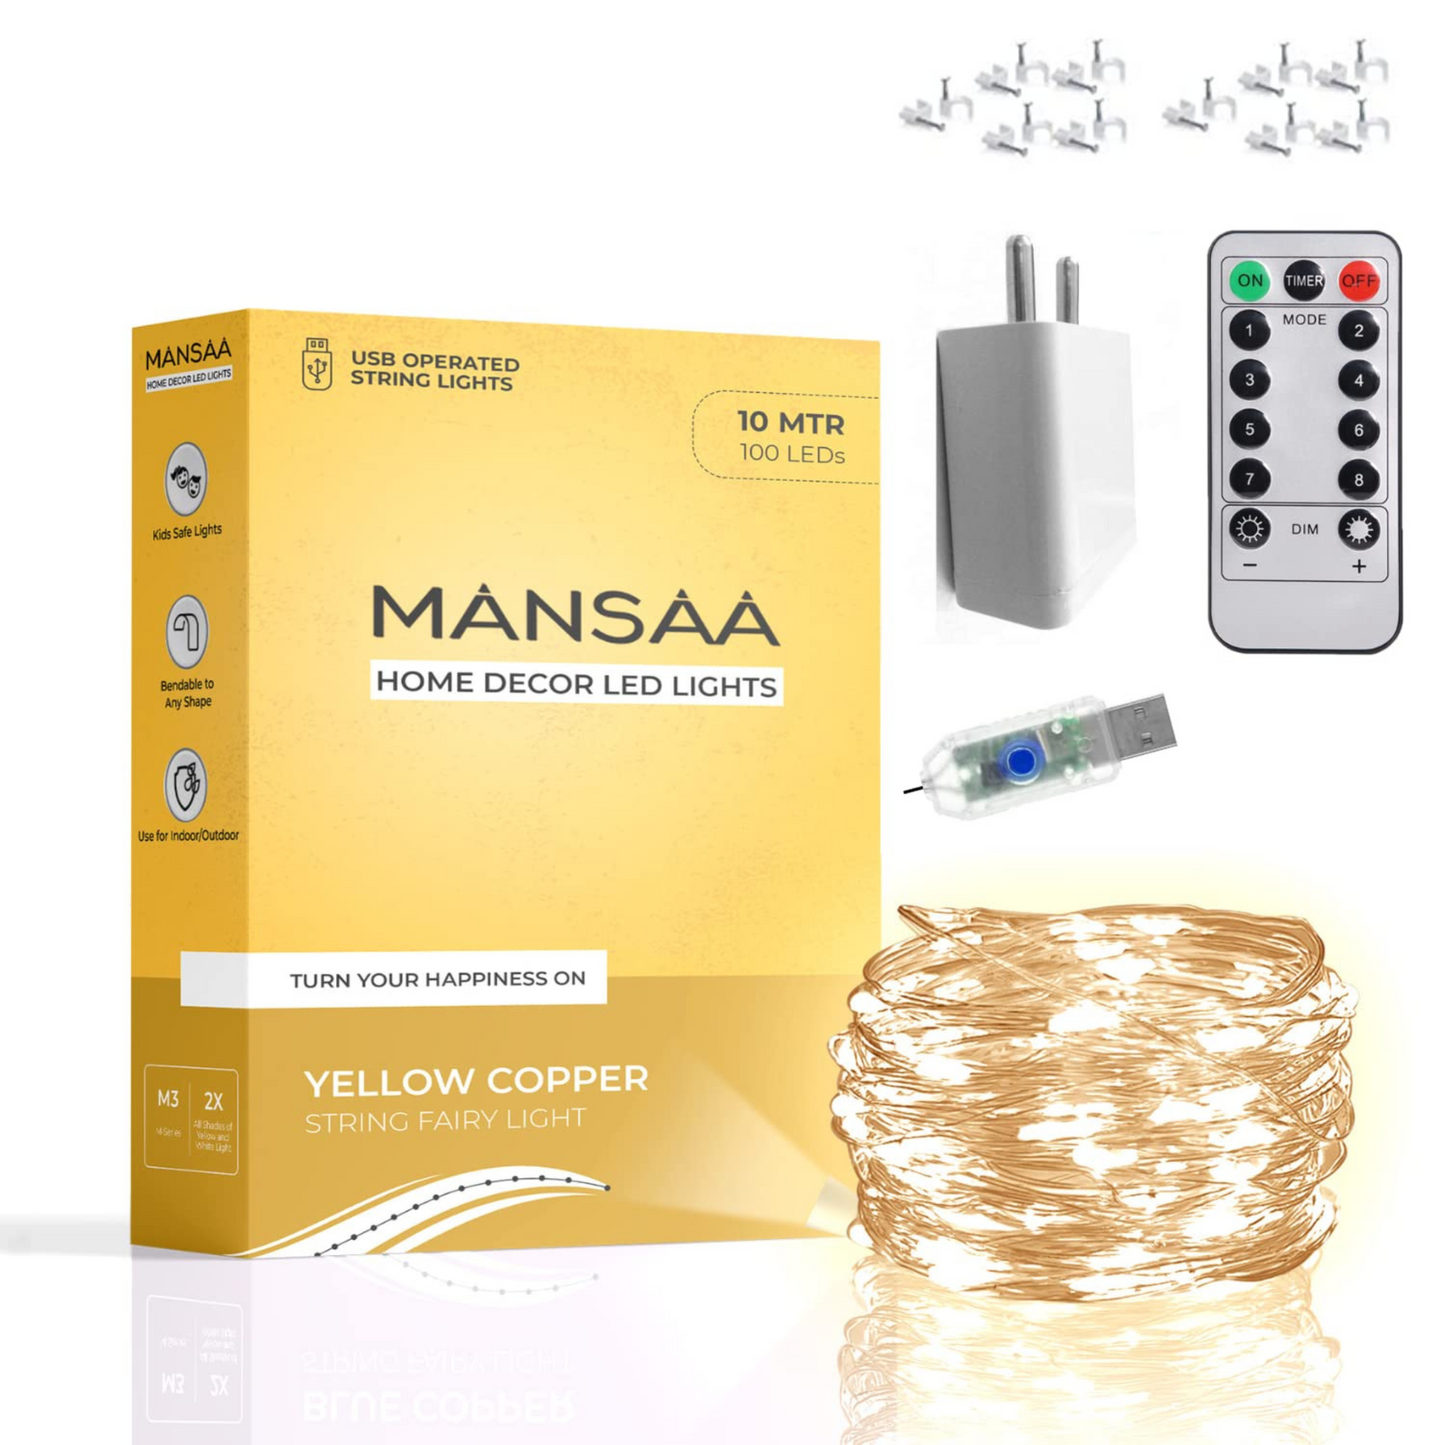 M7 USB LED Lights with Remote